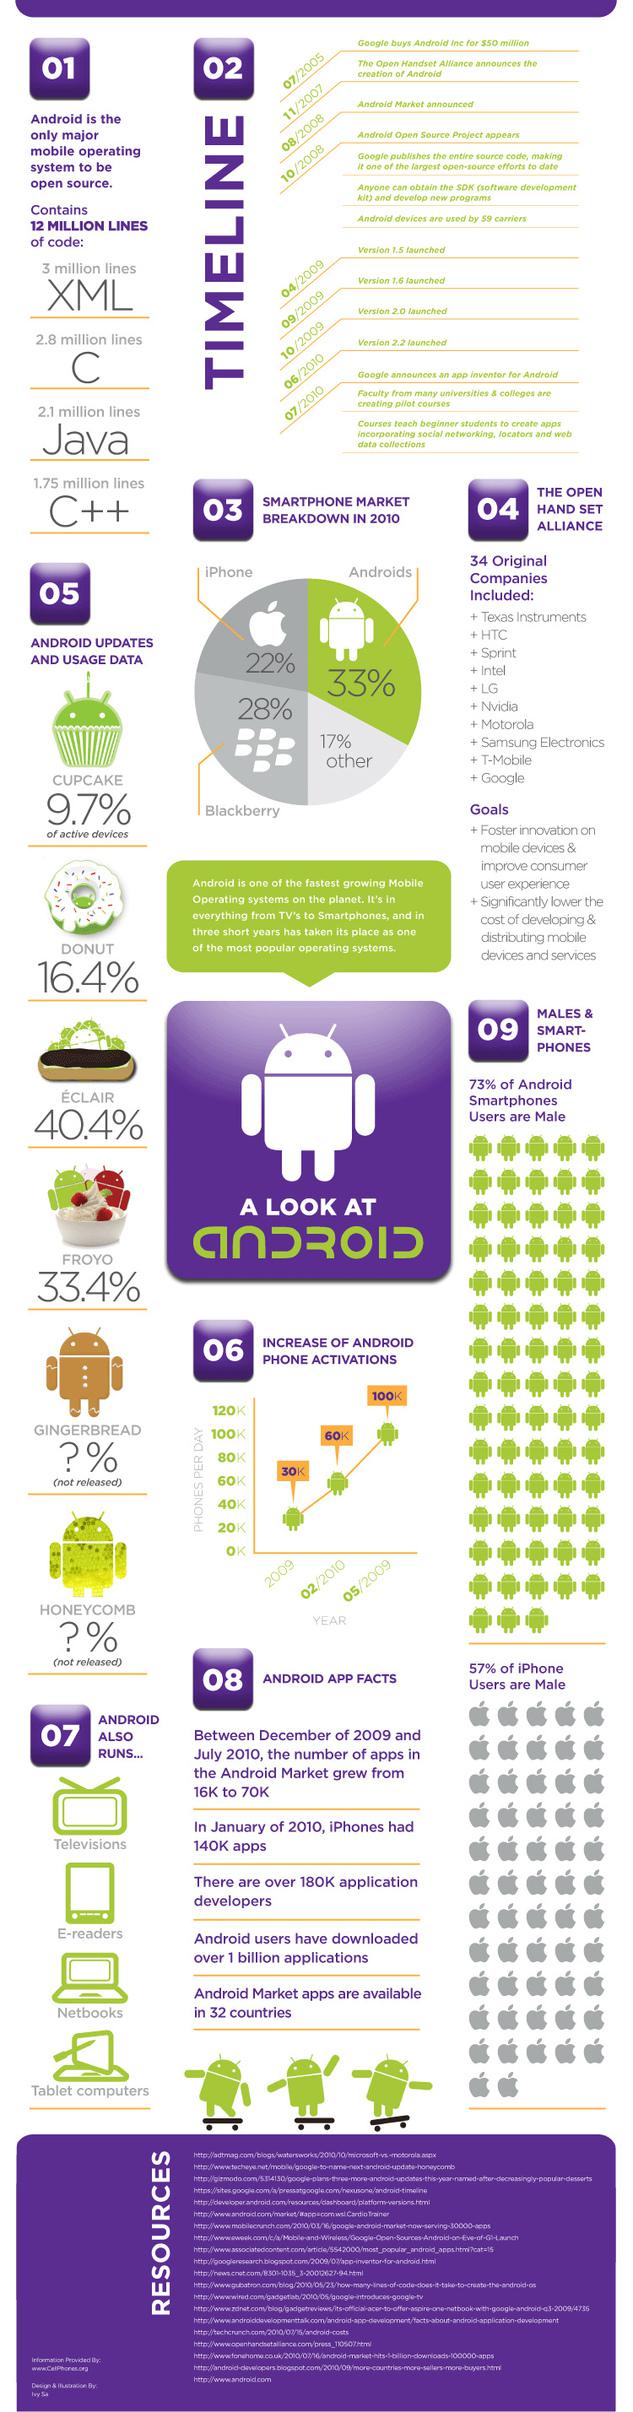 Android-history in Android, son histoire en 1 image